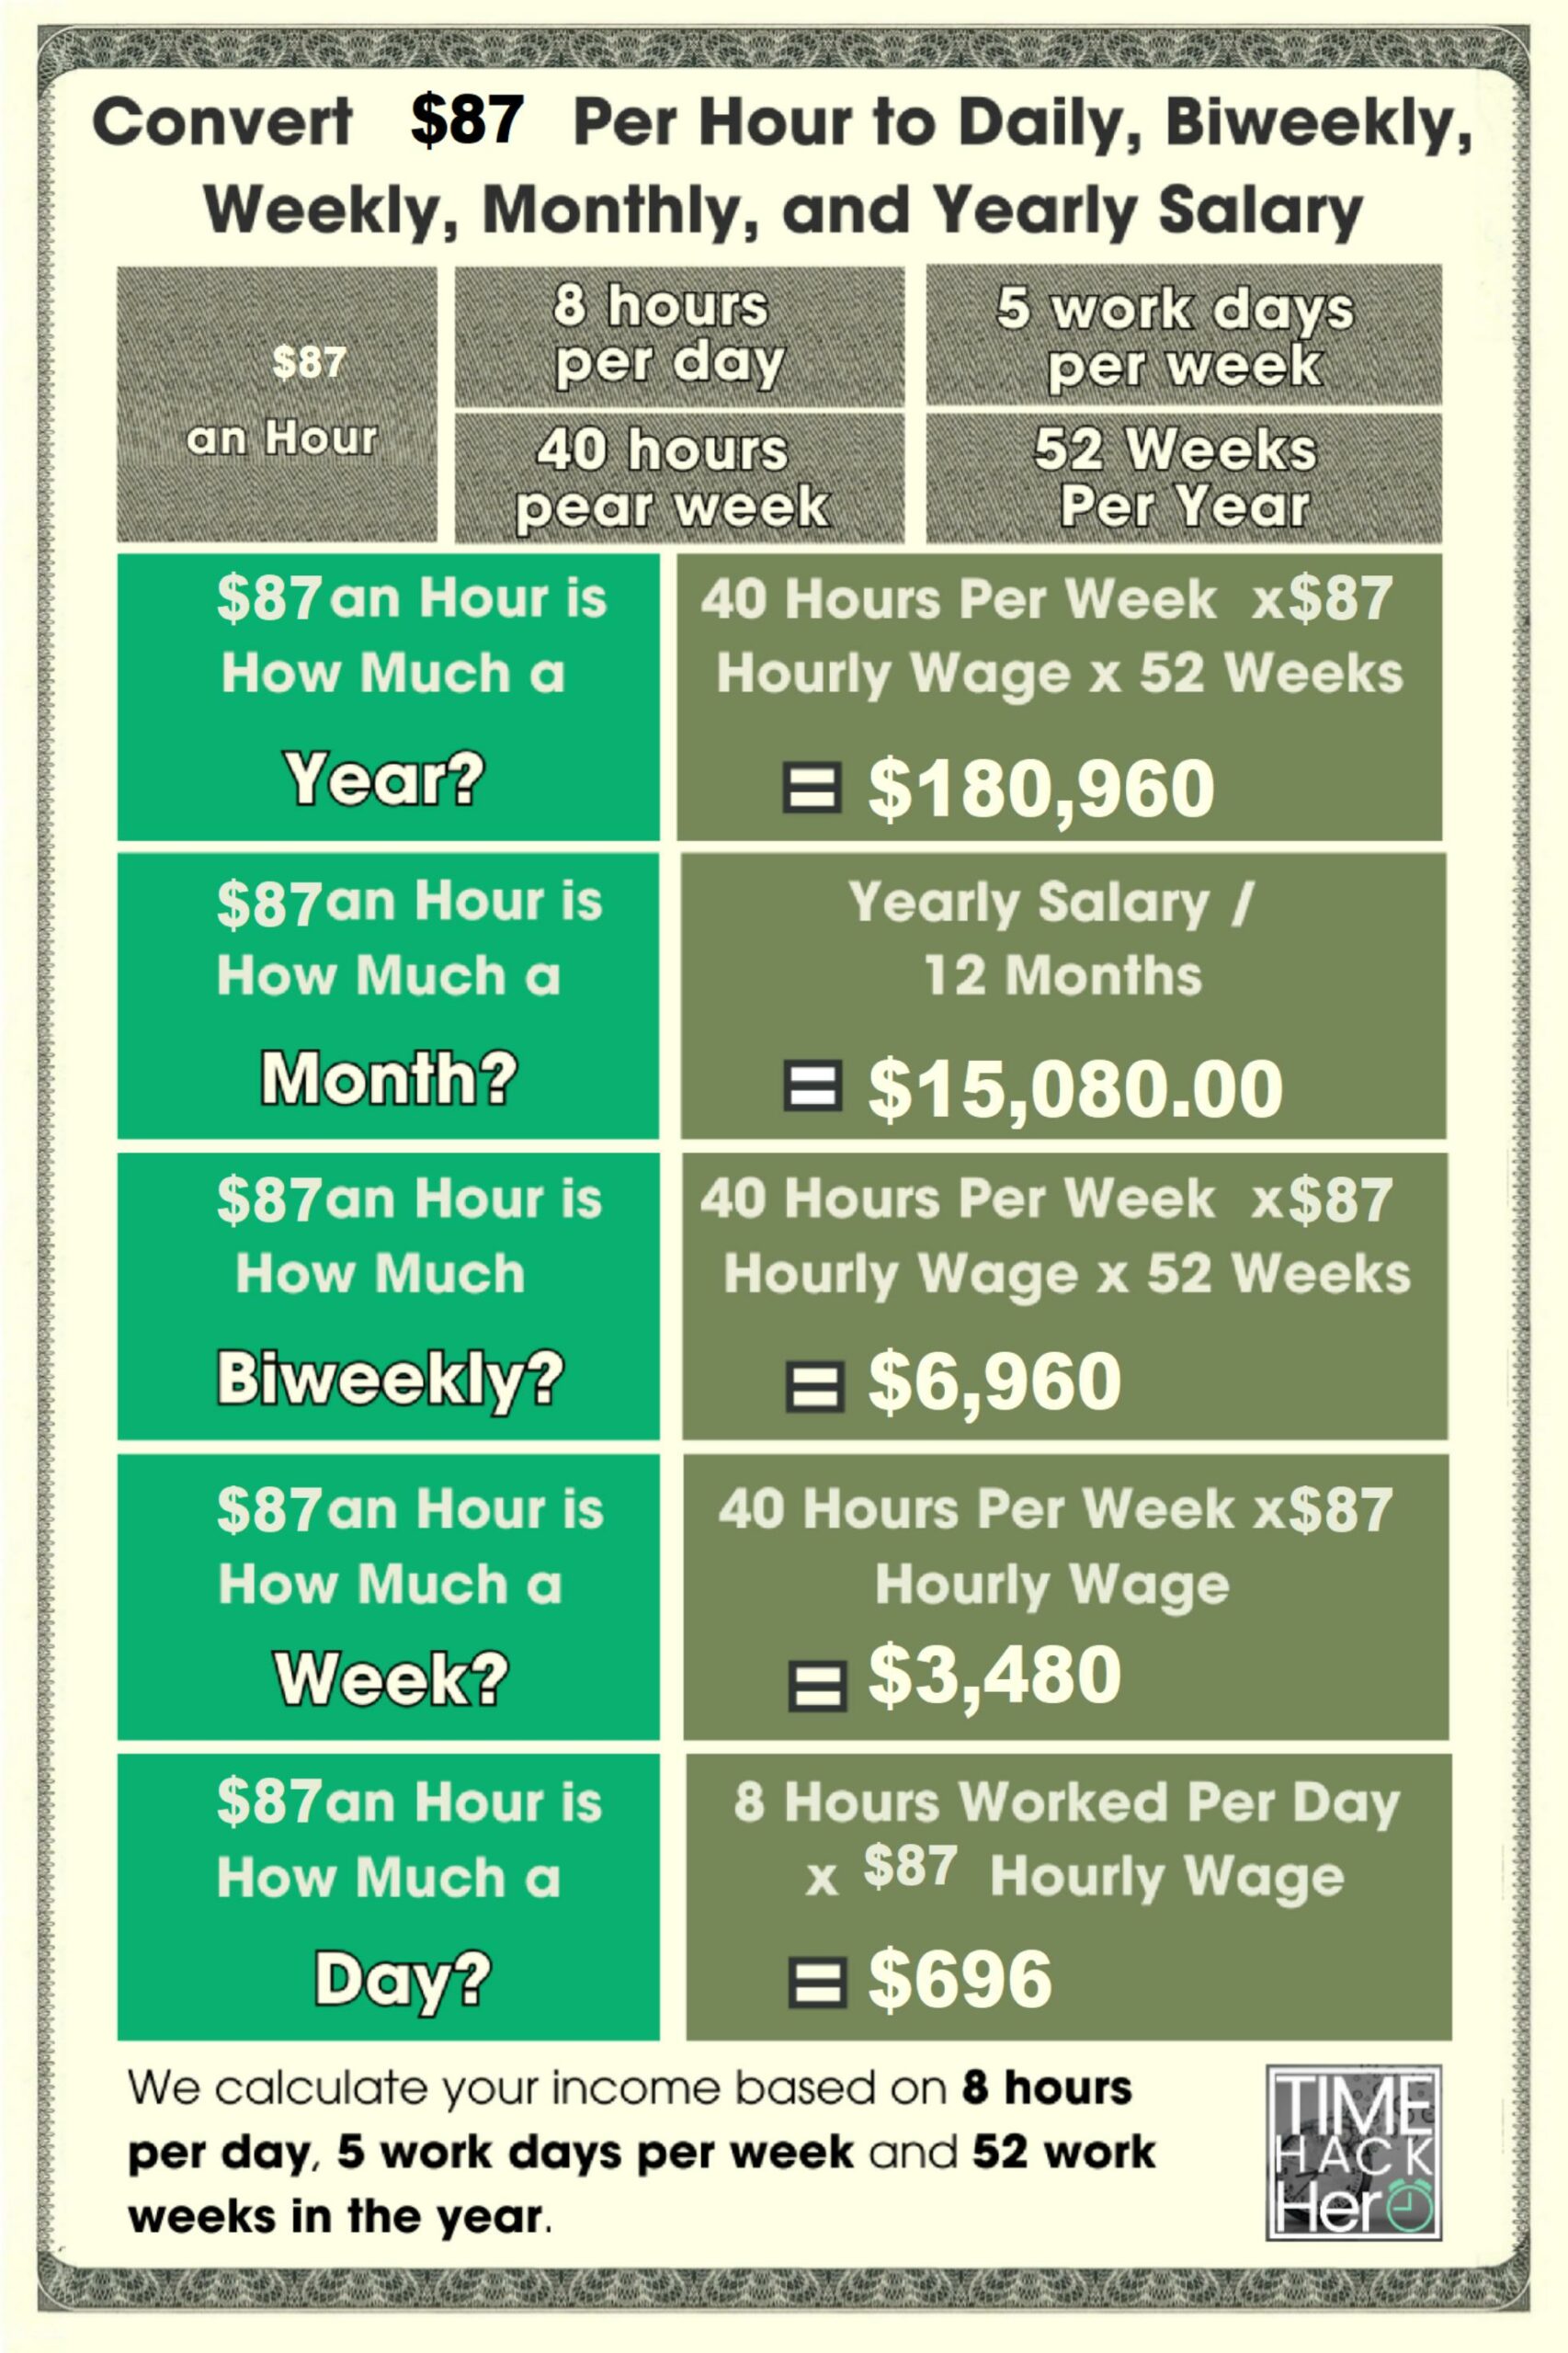 Convert $87 Per Hour to Weekly, Monthly, and Yearly Salary